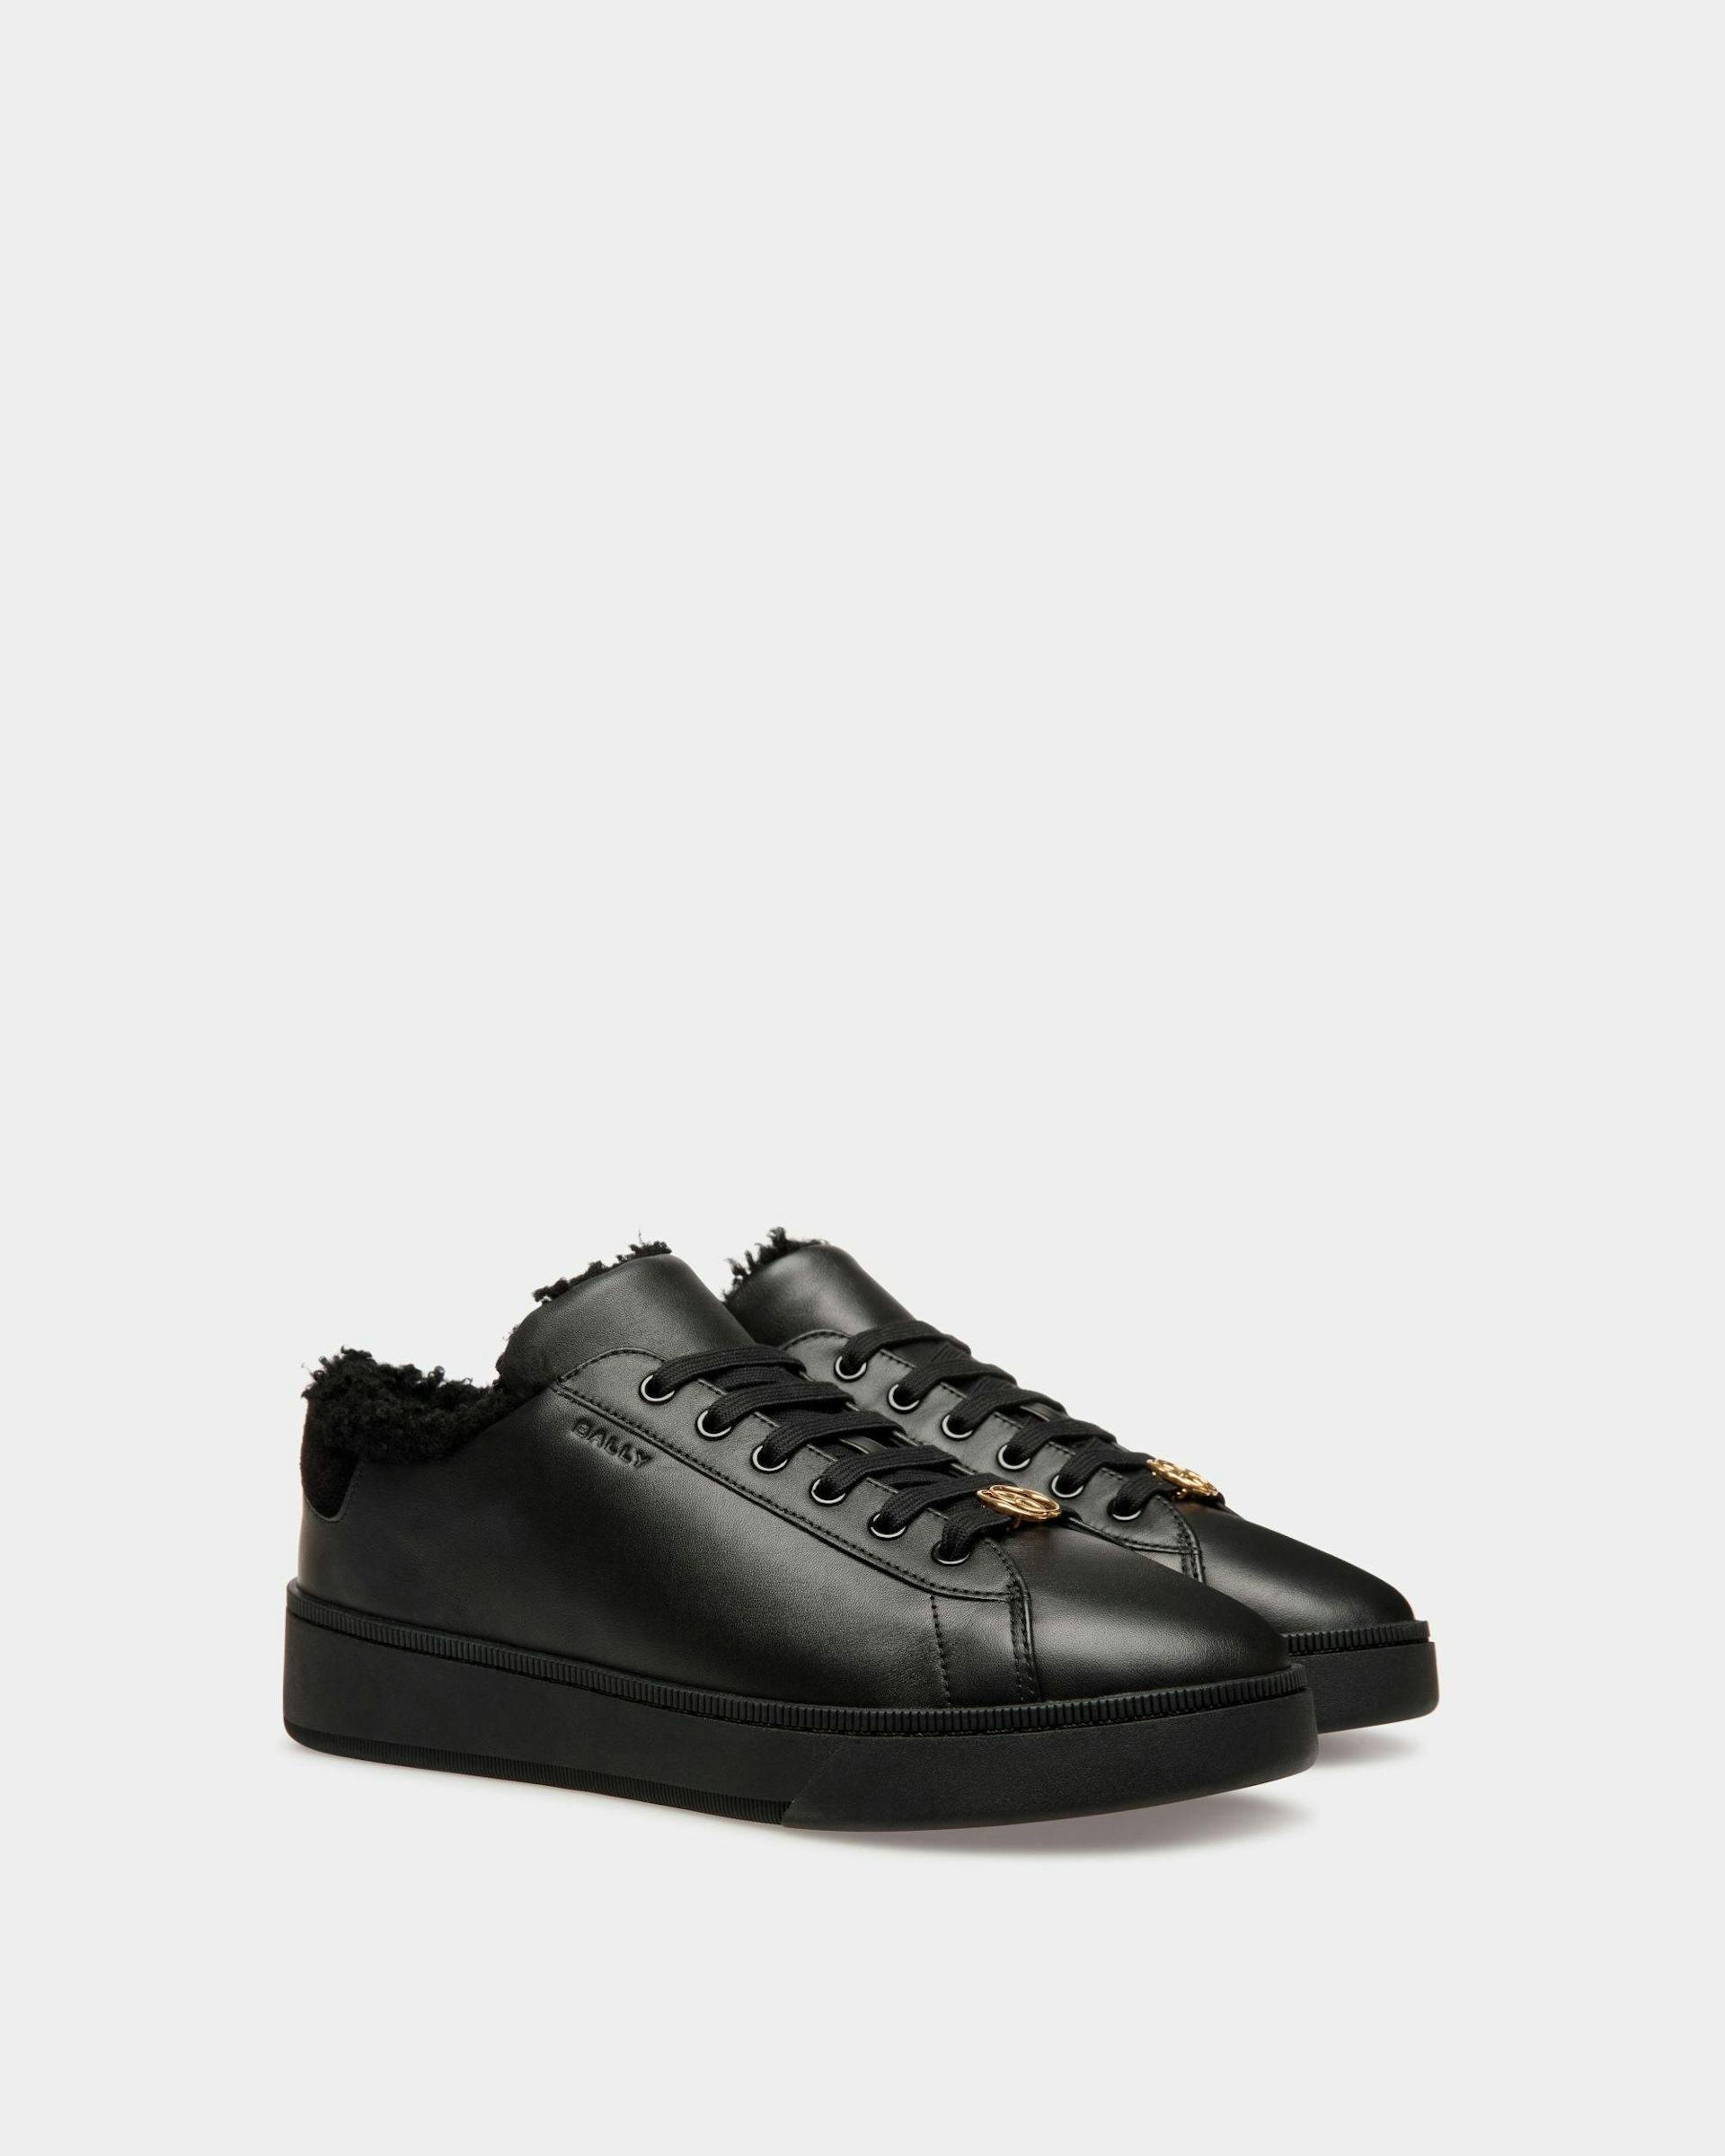 Men's Raise Sneakers In Black Leather | Bally | Still Life 3/4 Front